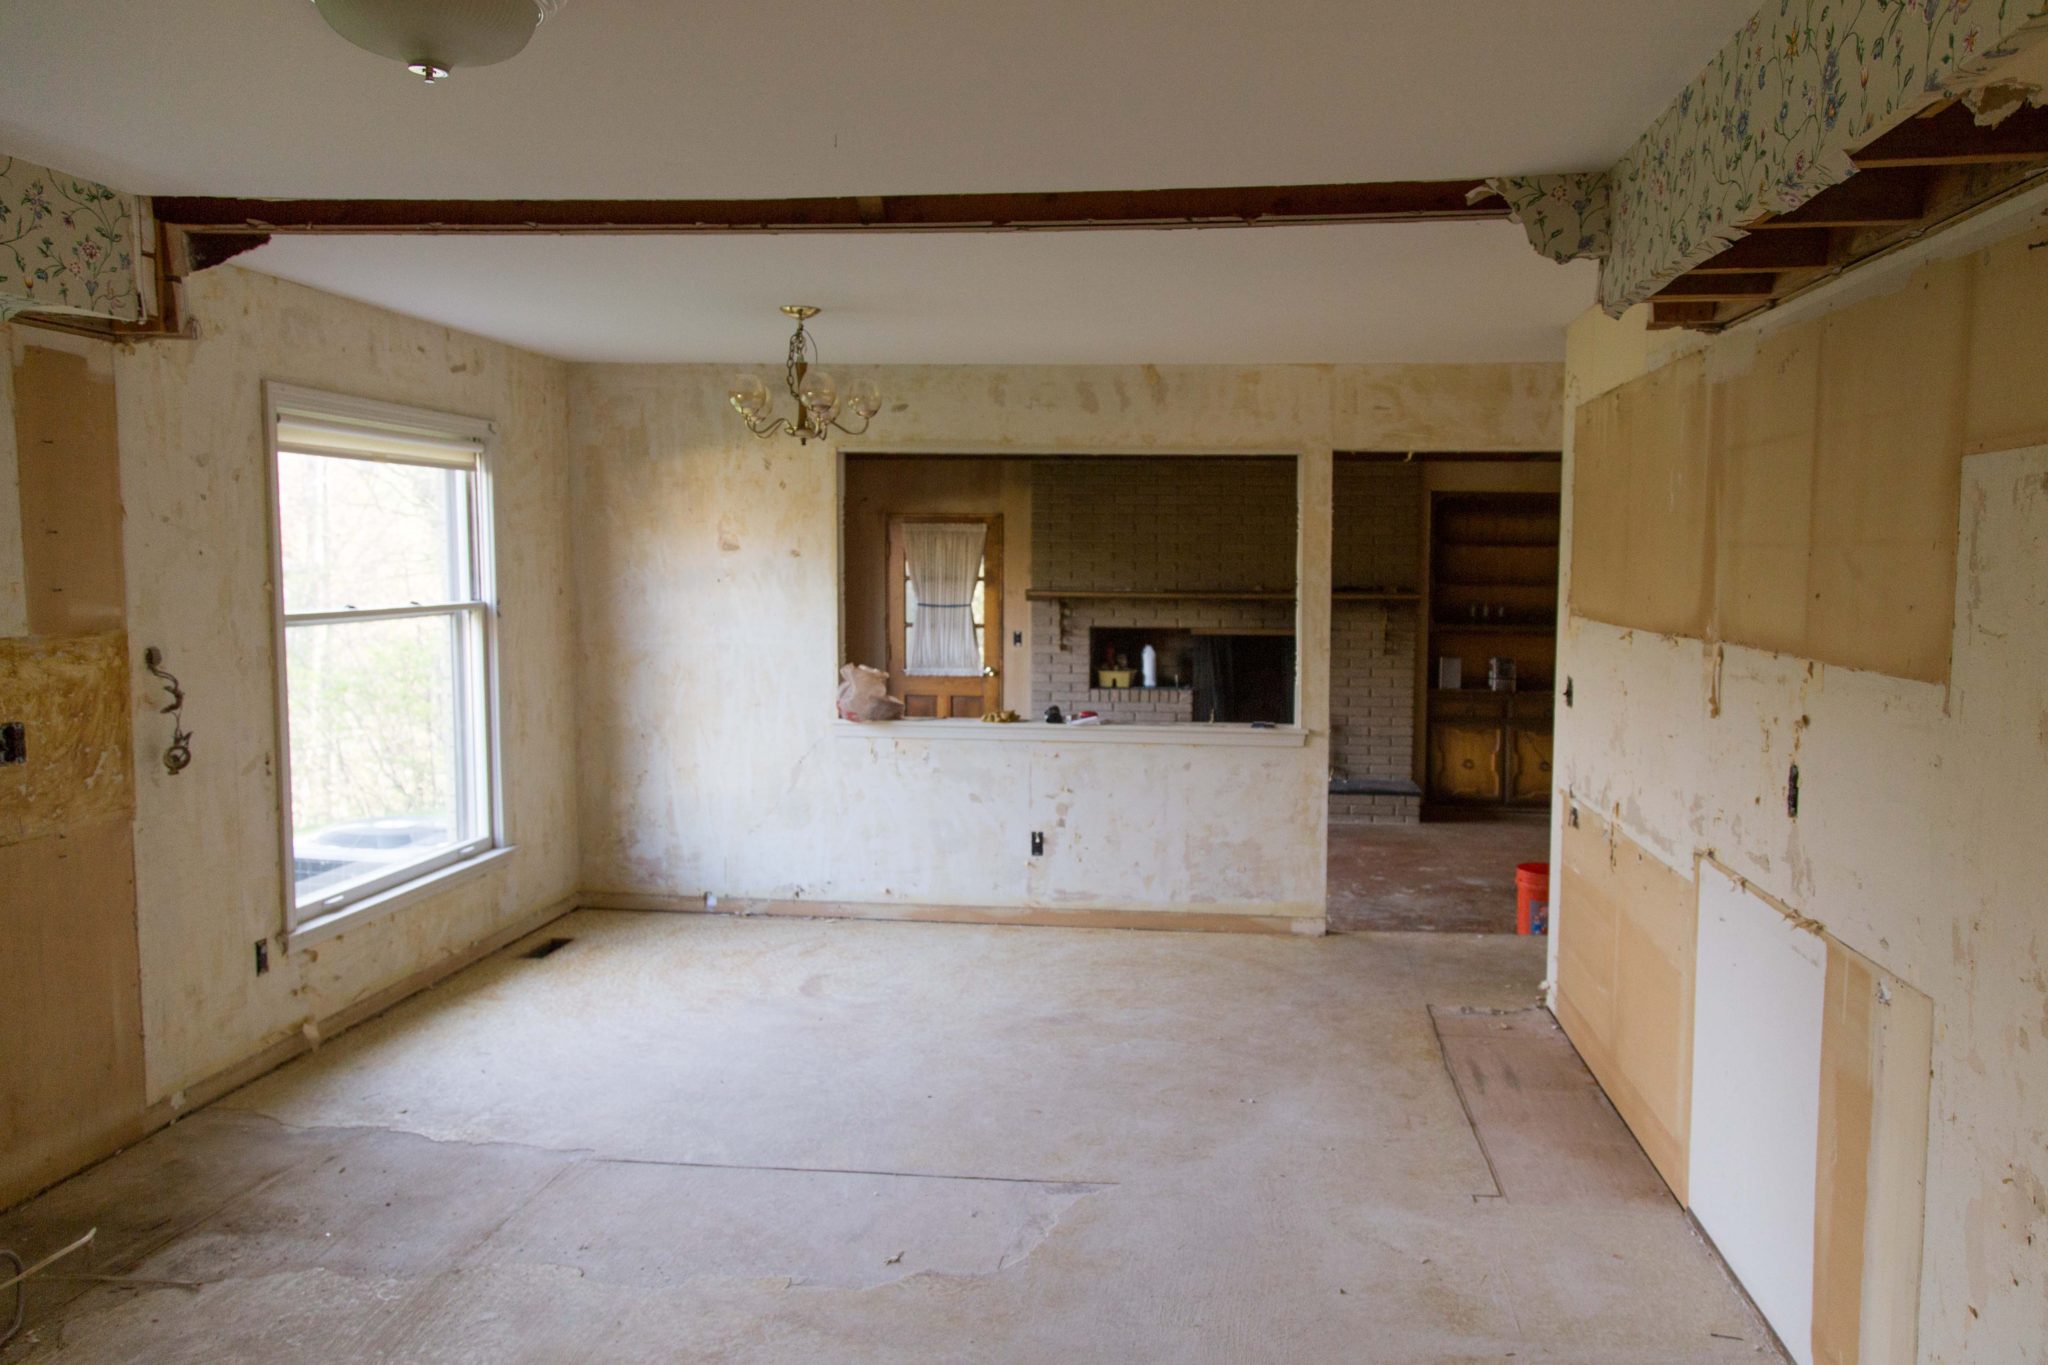 our kitchen demolition and renovation | fixer upper | our new kitchen on allweareblog.com